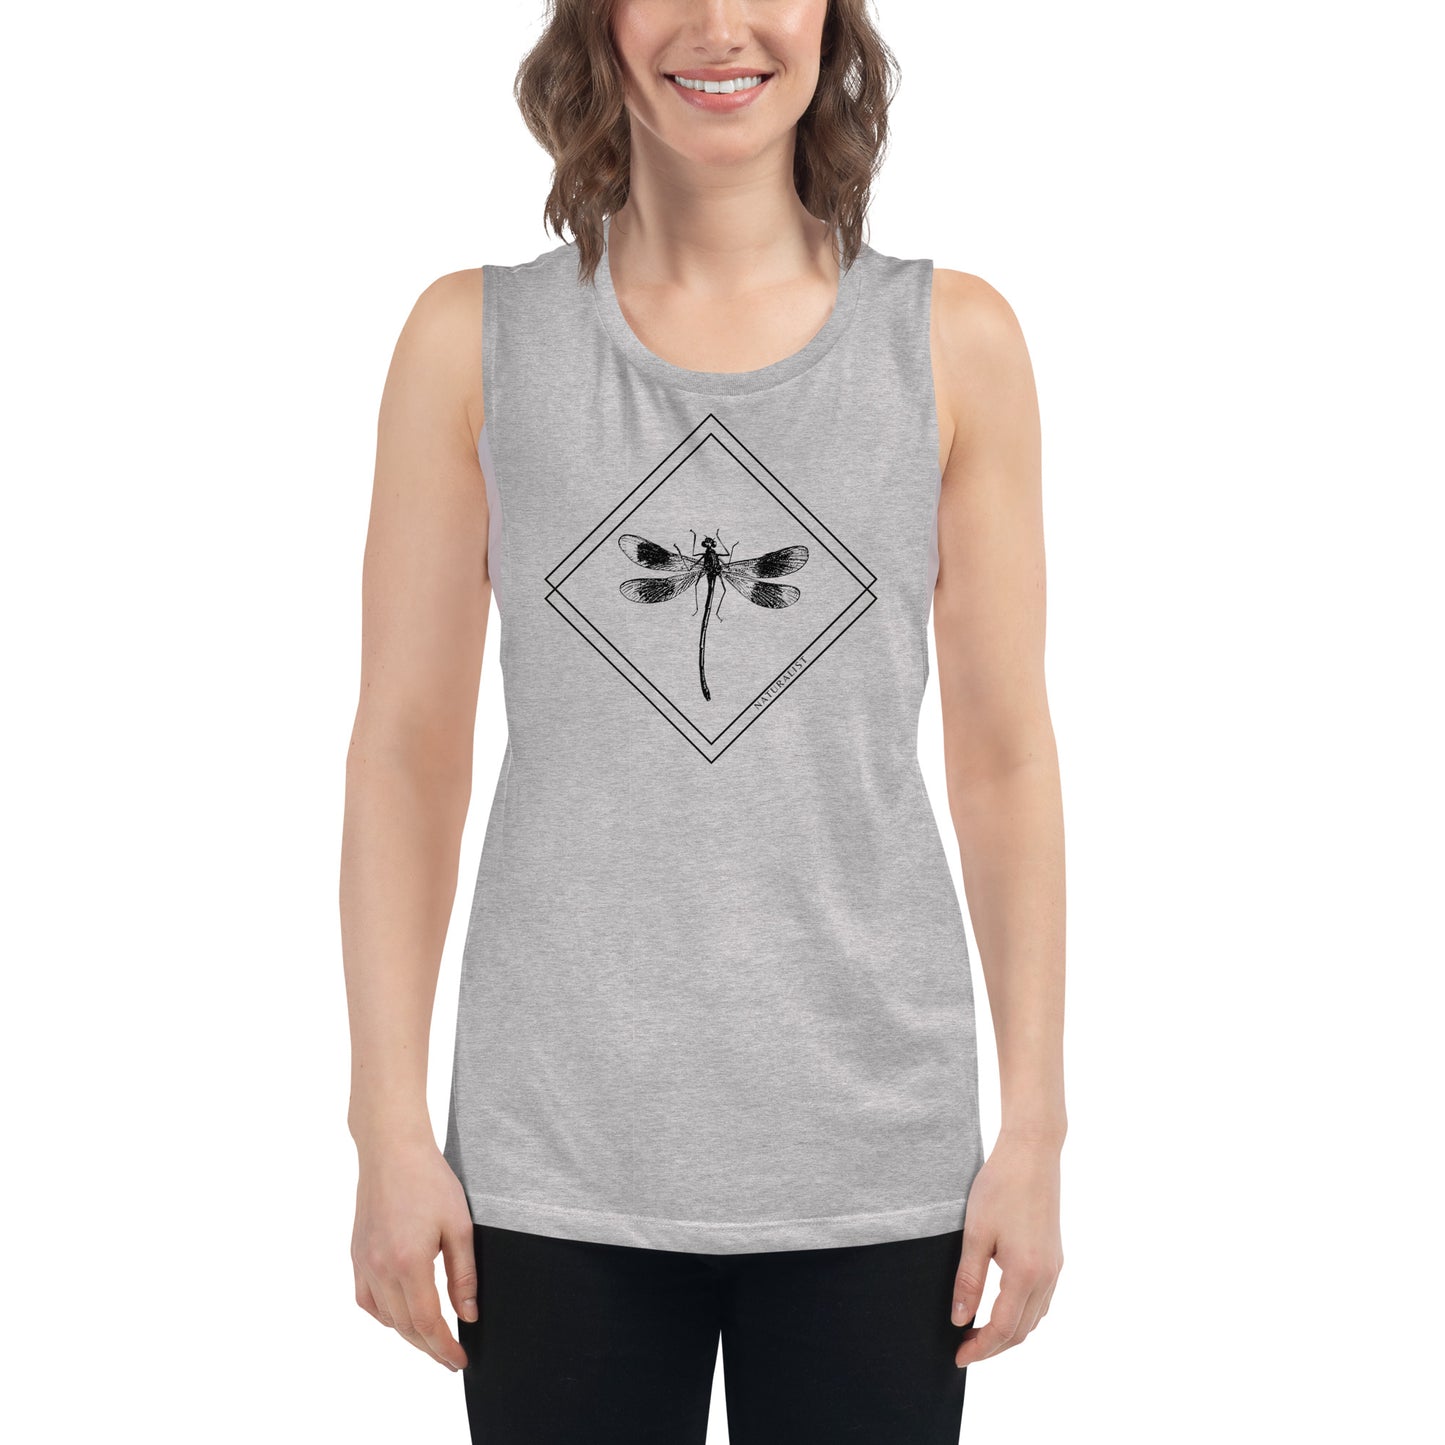 dragonfly bug insect nature naturalist shirt t-shirt tee tshirt sleeveless workout outside yoga forest women's 